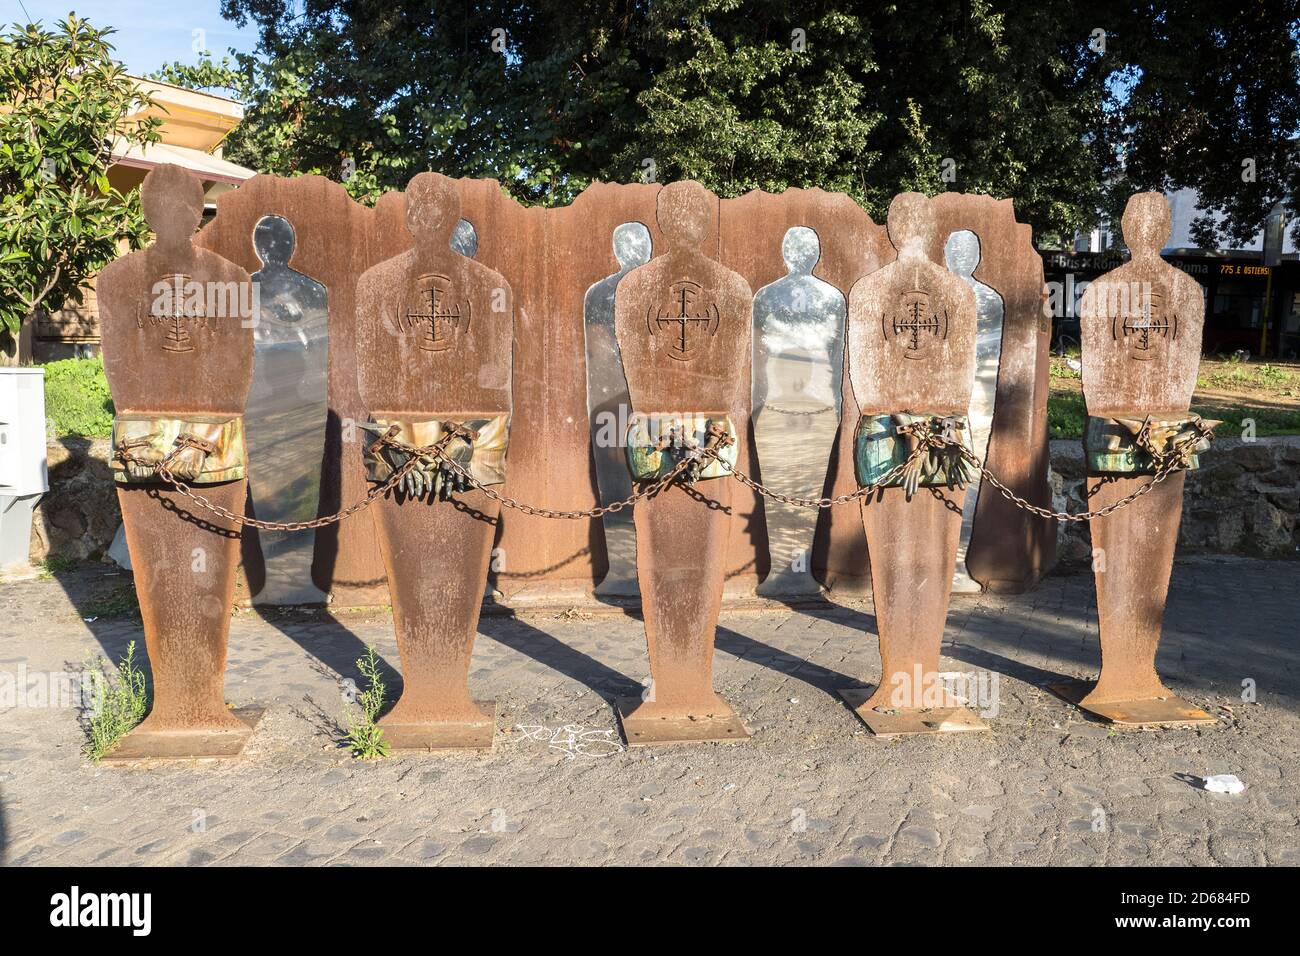 Anti-fascist monument 'Tutti potenziali bersagli' (all potential targets) dedicated to the victims of Nazism and racism in piazzale Ostiense - Rome, Italy Stock Photo